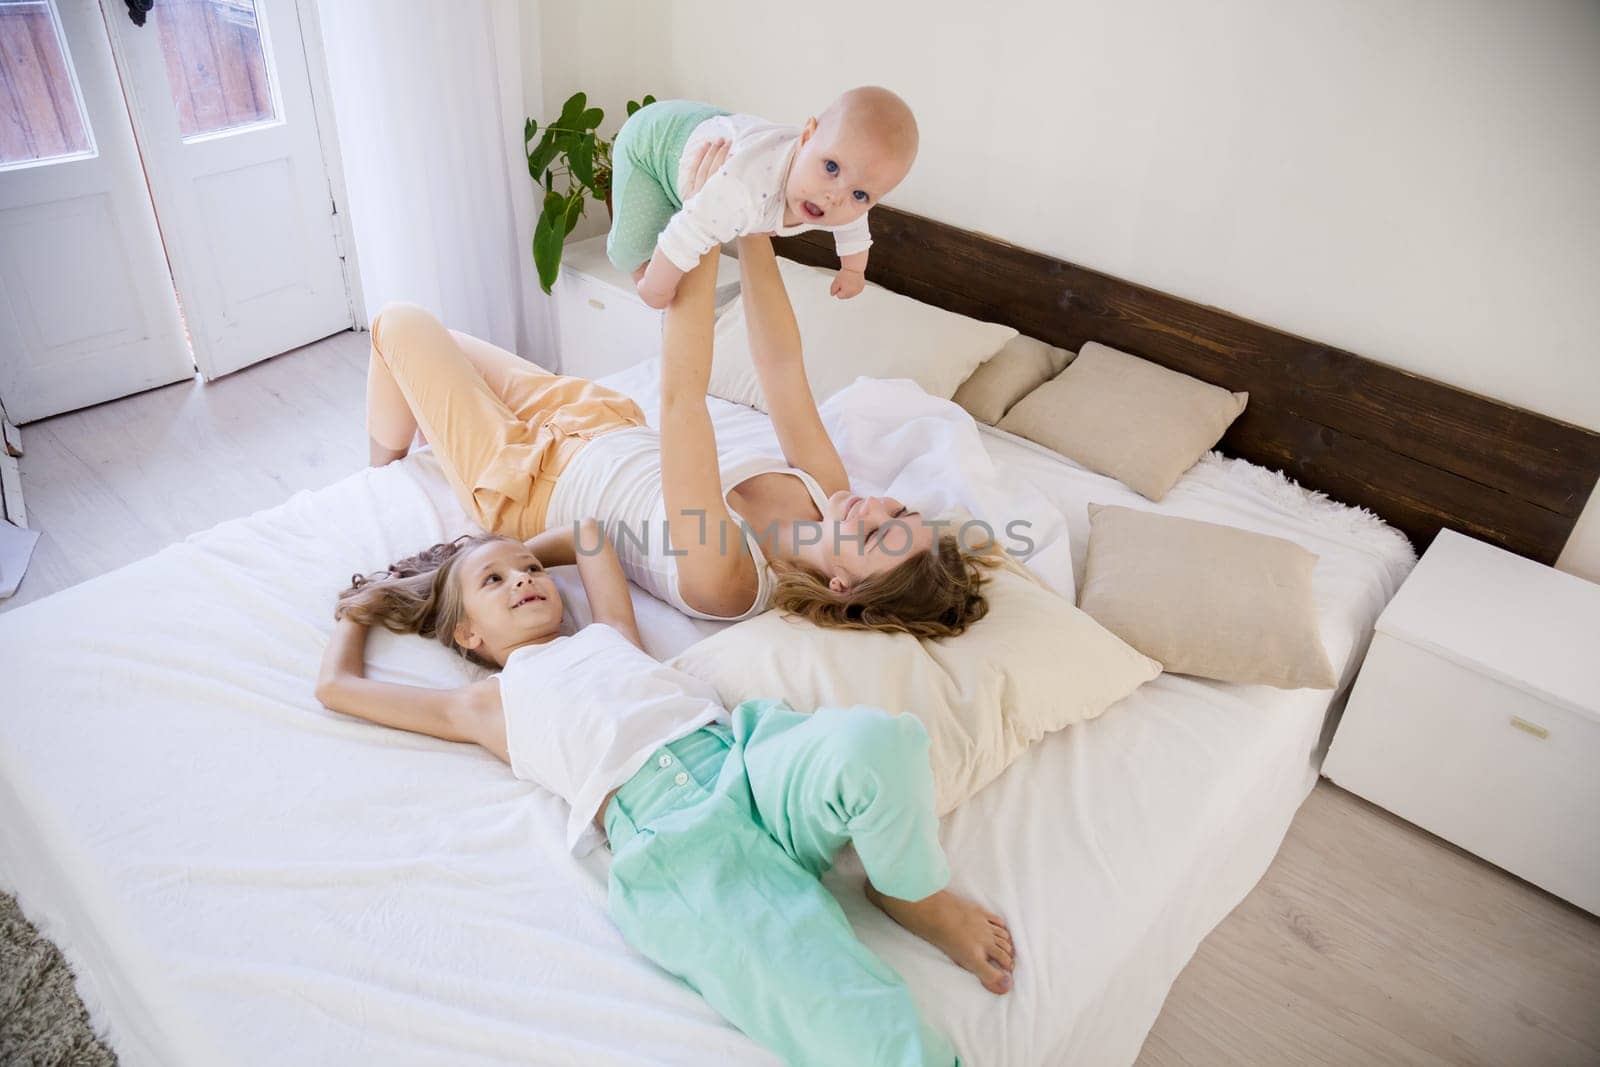 three little girls sisters play in the bedroom on the bed by Simakov